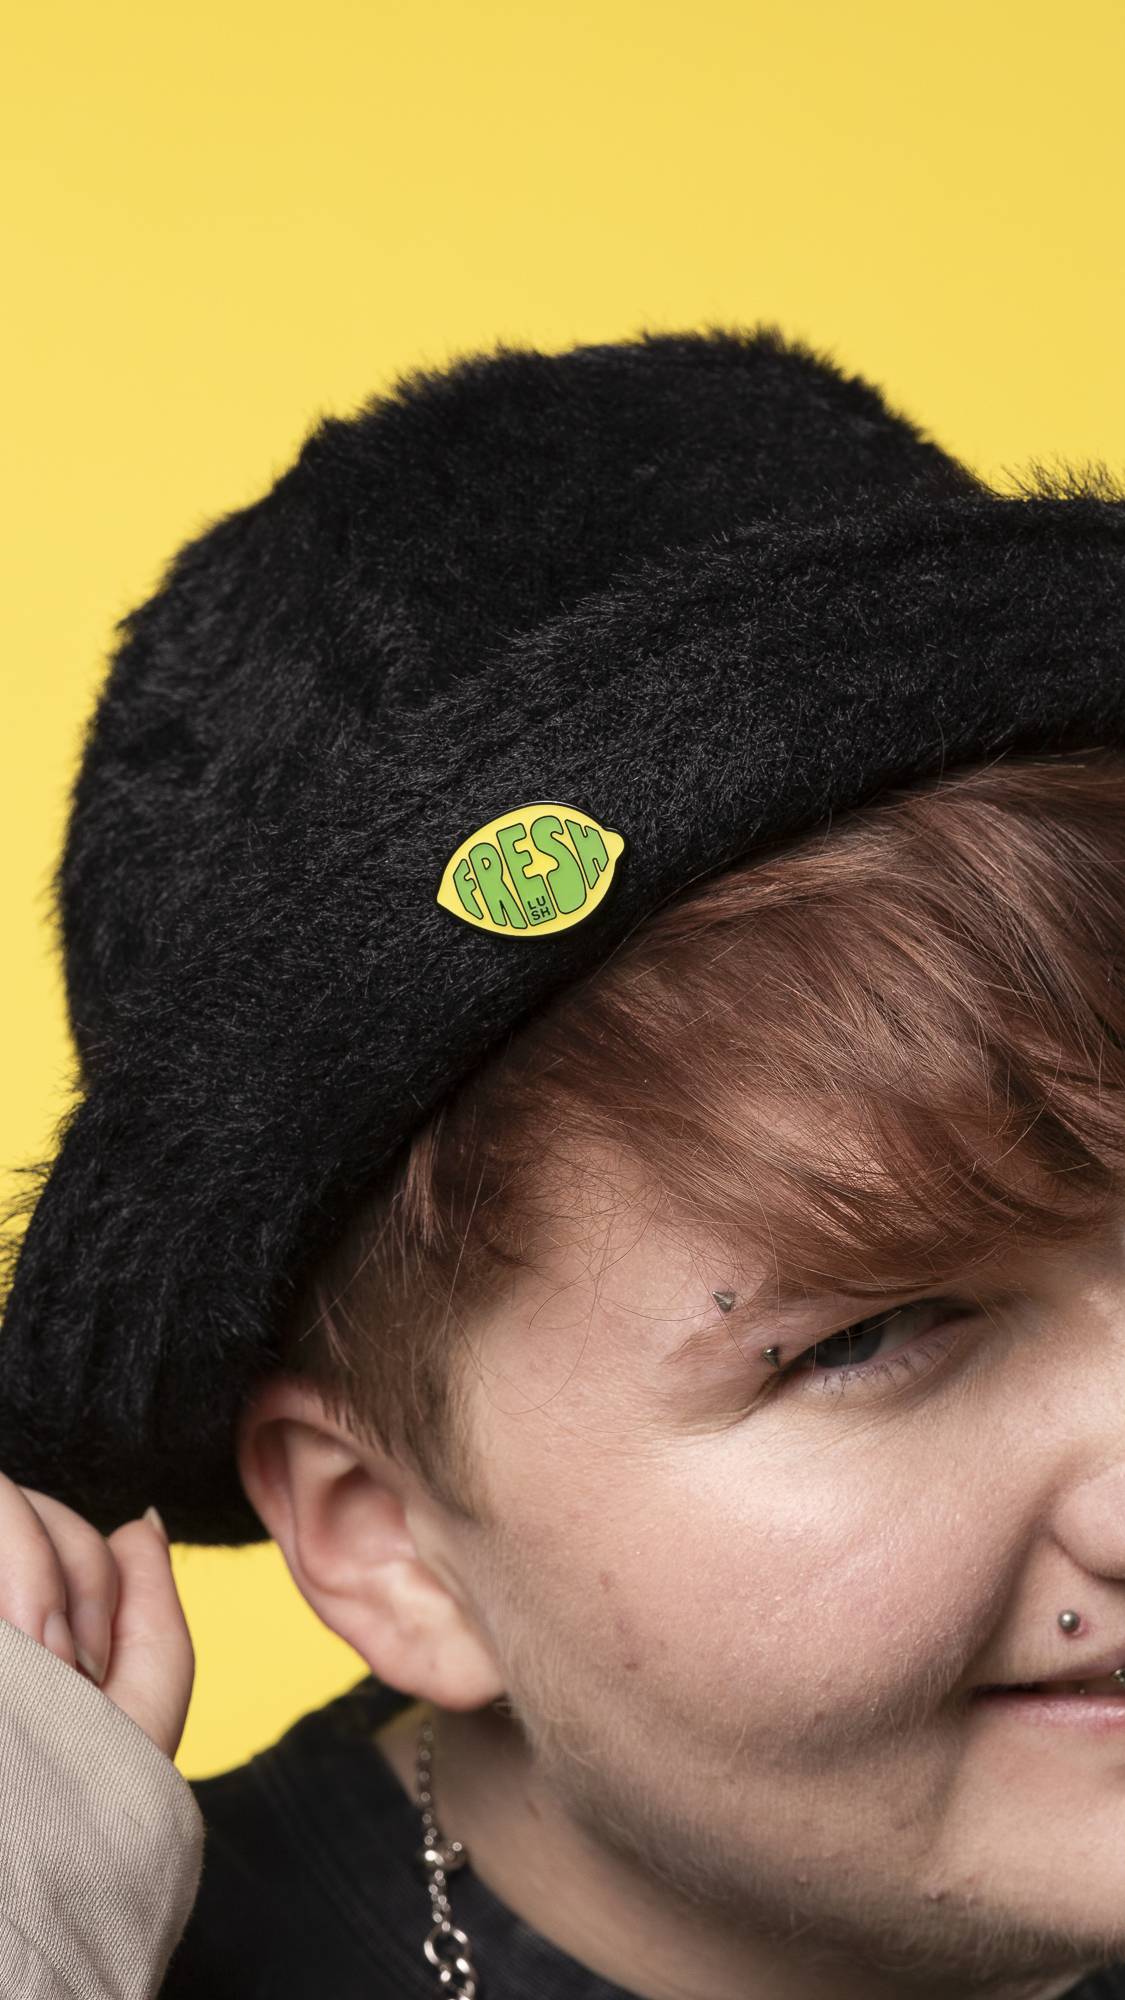 A close-up of the Fresh Values pin badge on a black, fuzzy hat. On a bright yellow background.